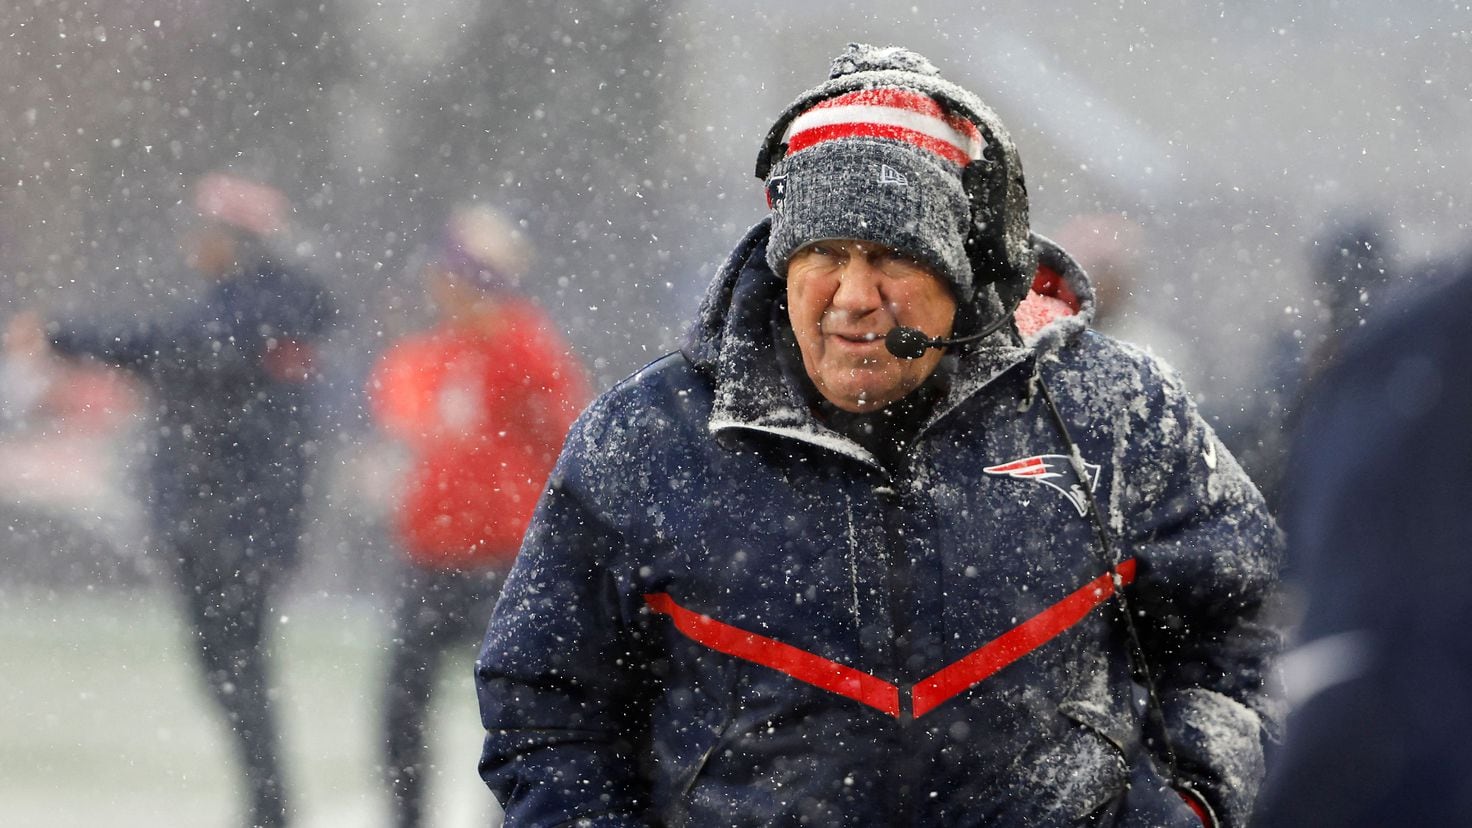 Bill Belichick is leaving the New England Patriots after 24 years at the helm